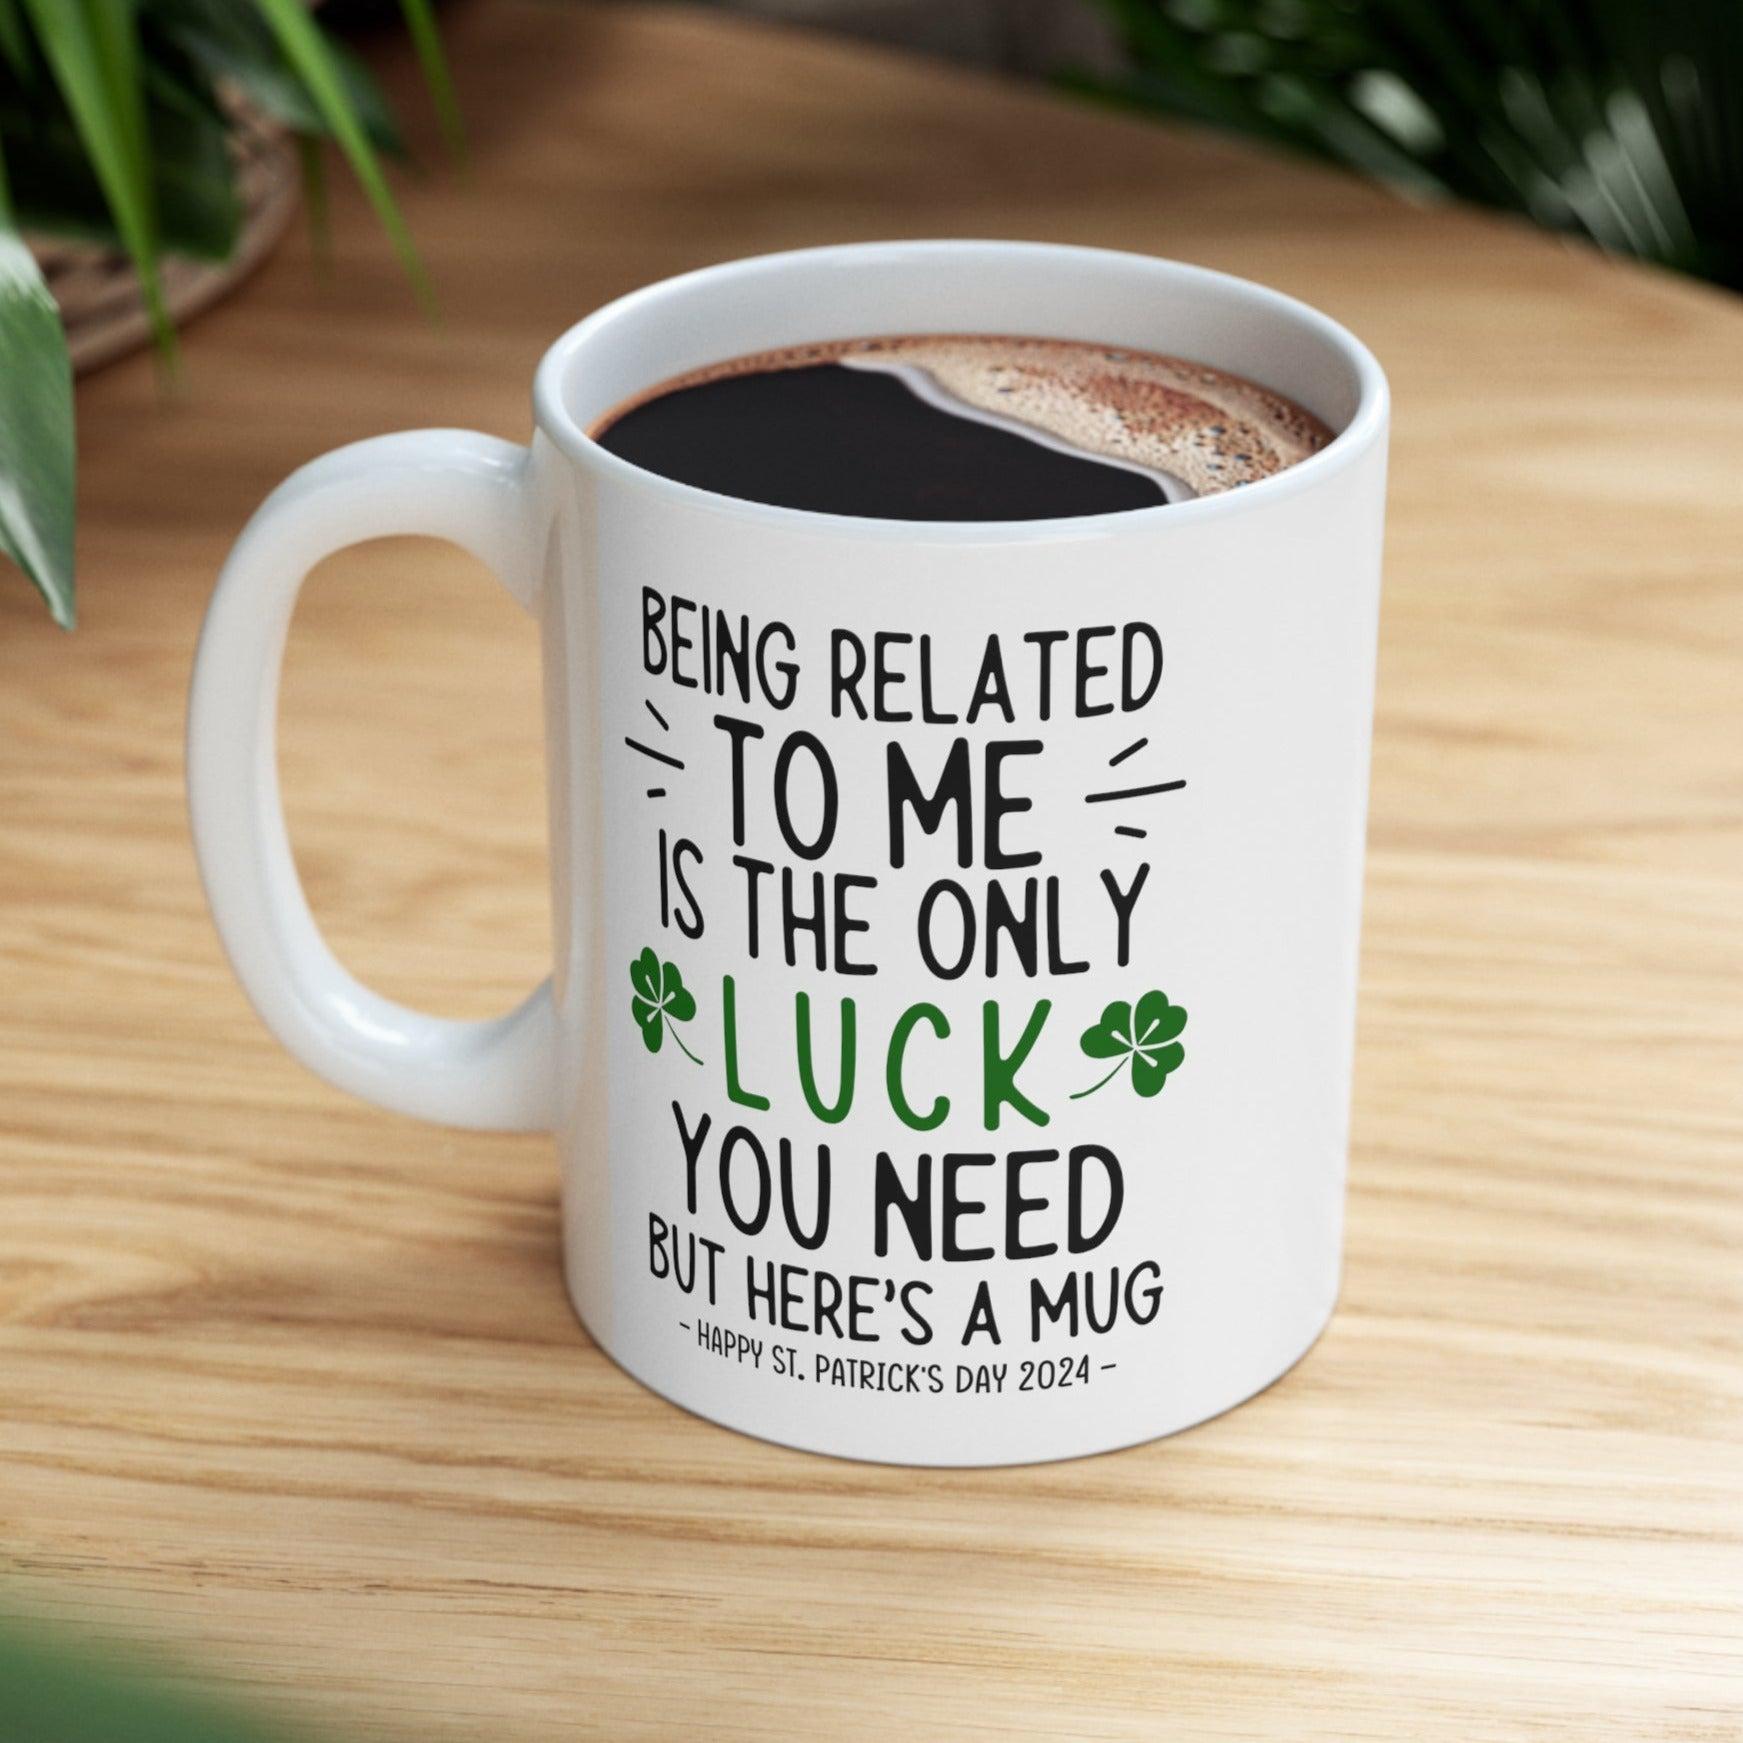 Being Related To Me Is The Only Luck Funny Gift Mug 11oz